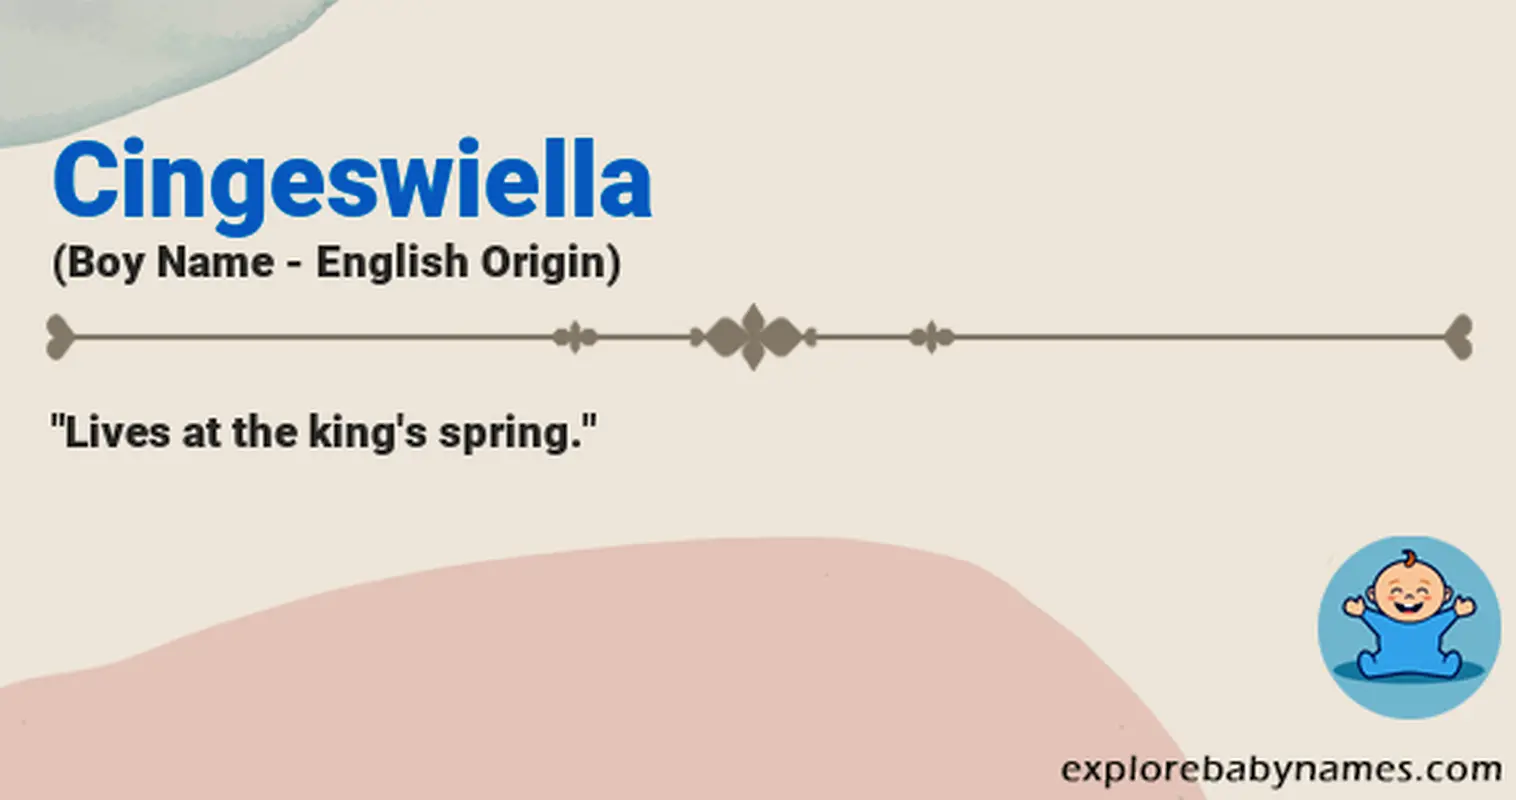 Meaning of Cingeswiella